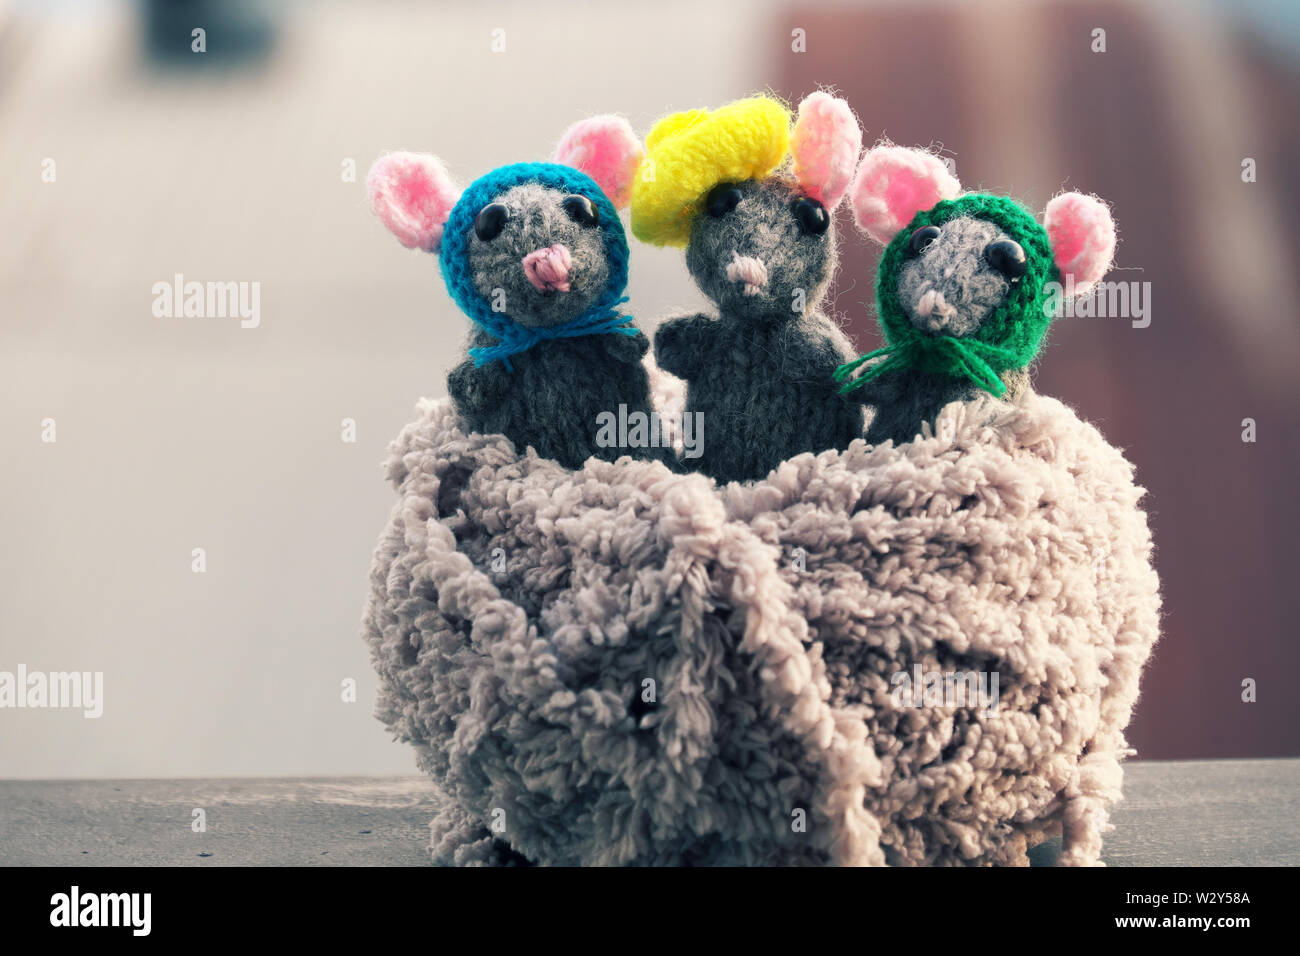 Amazing close up shooting of handmade product,knitted mouse in ball of yarn, blurred background, handicraft rats for nice gift or children toys Stock Photo